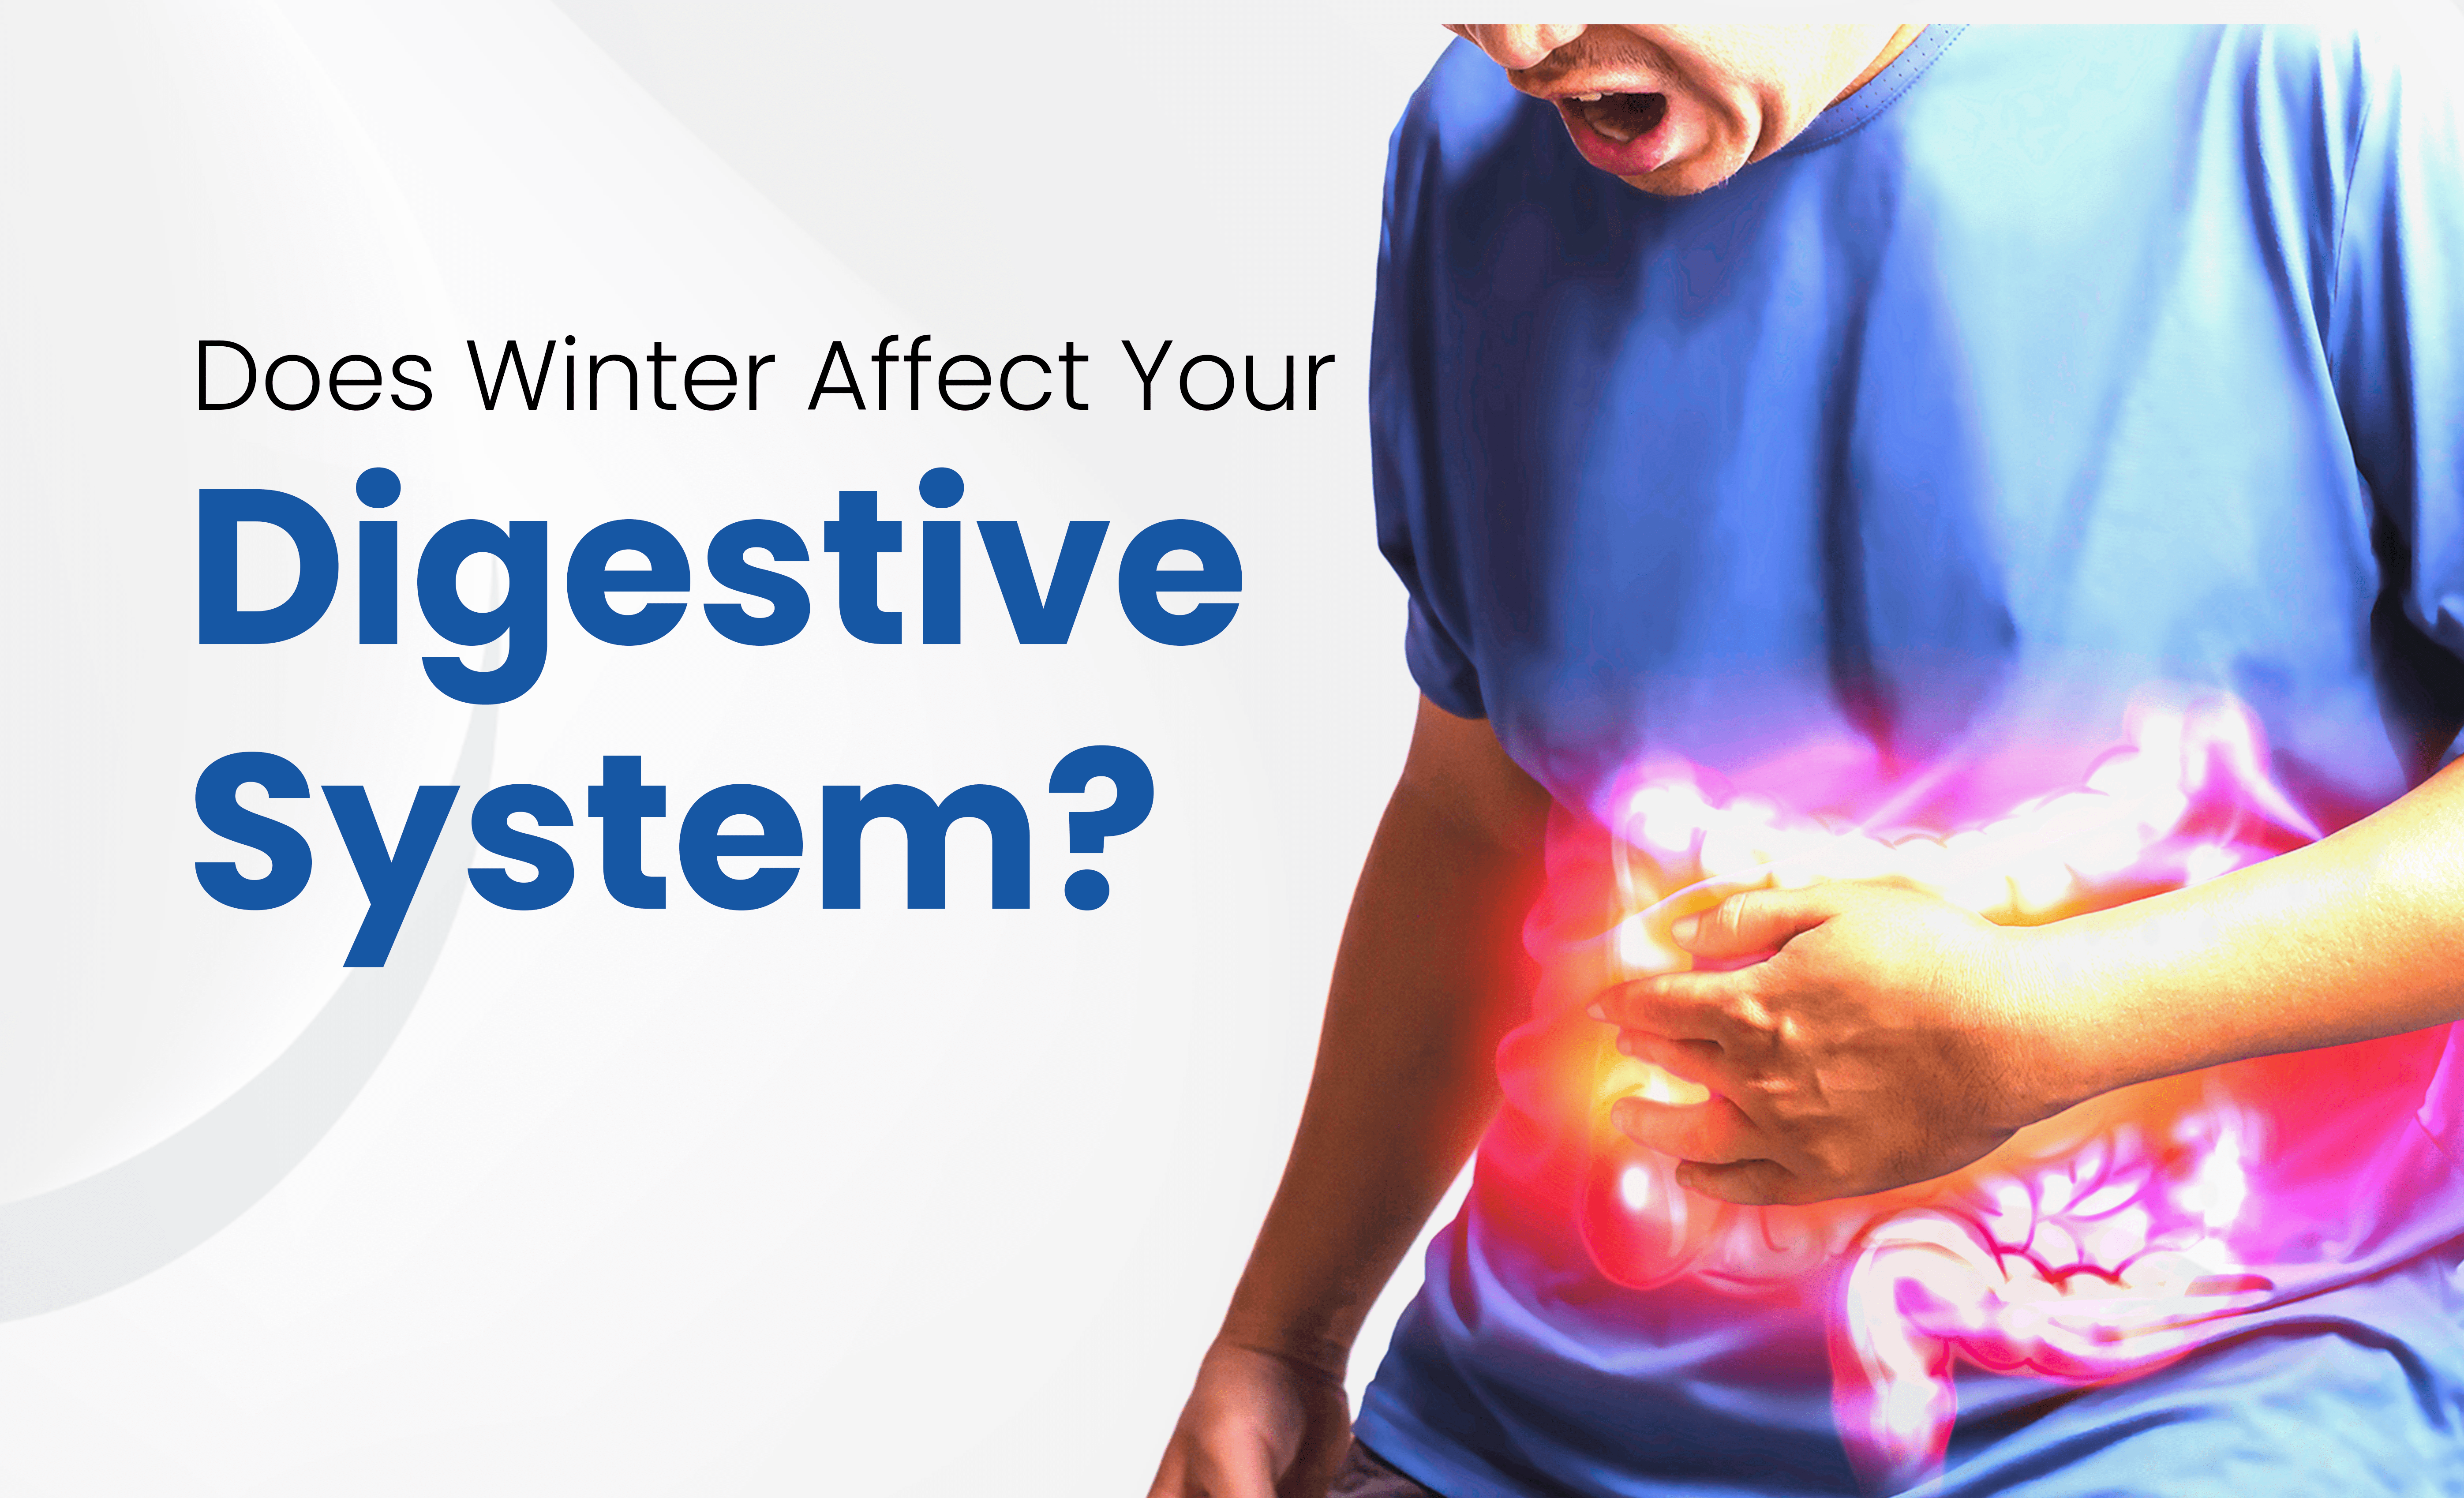 Tips to boost digestion and avoid gastrointestinal problems in winter